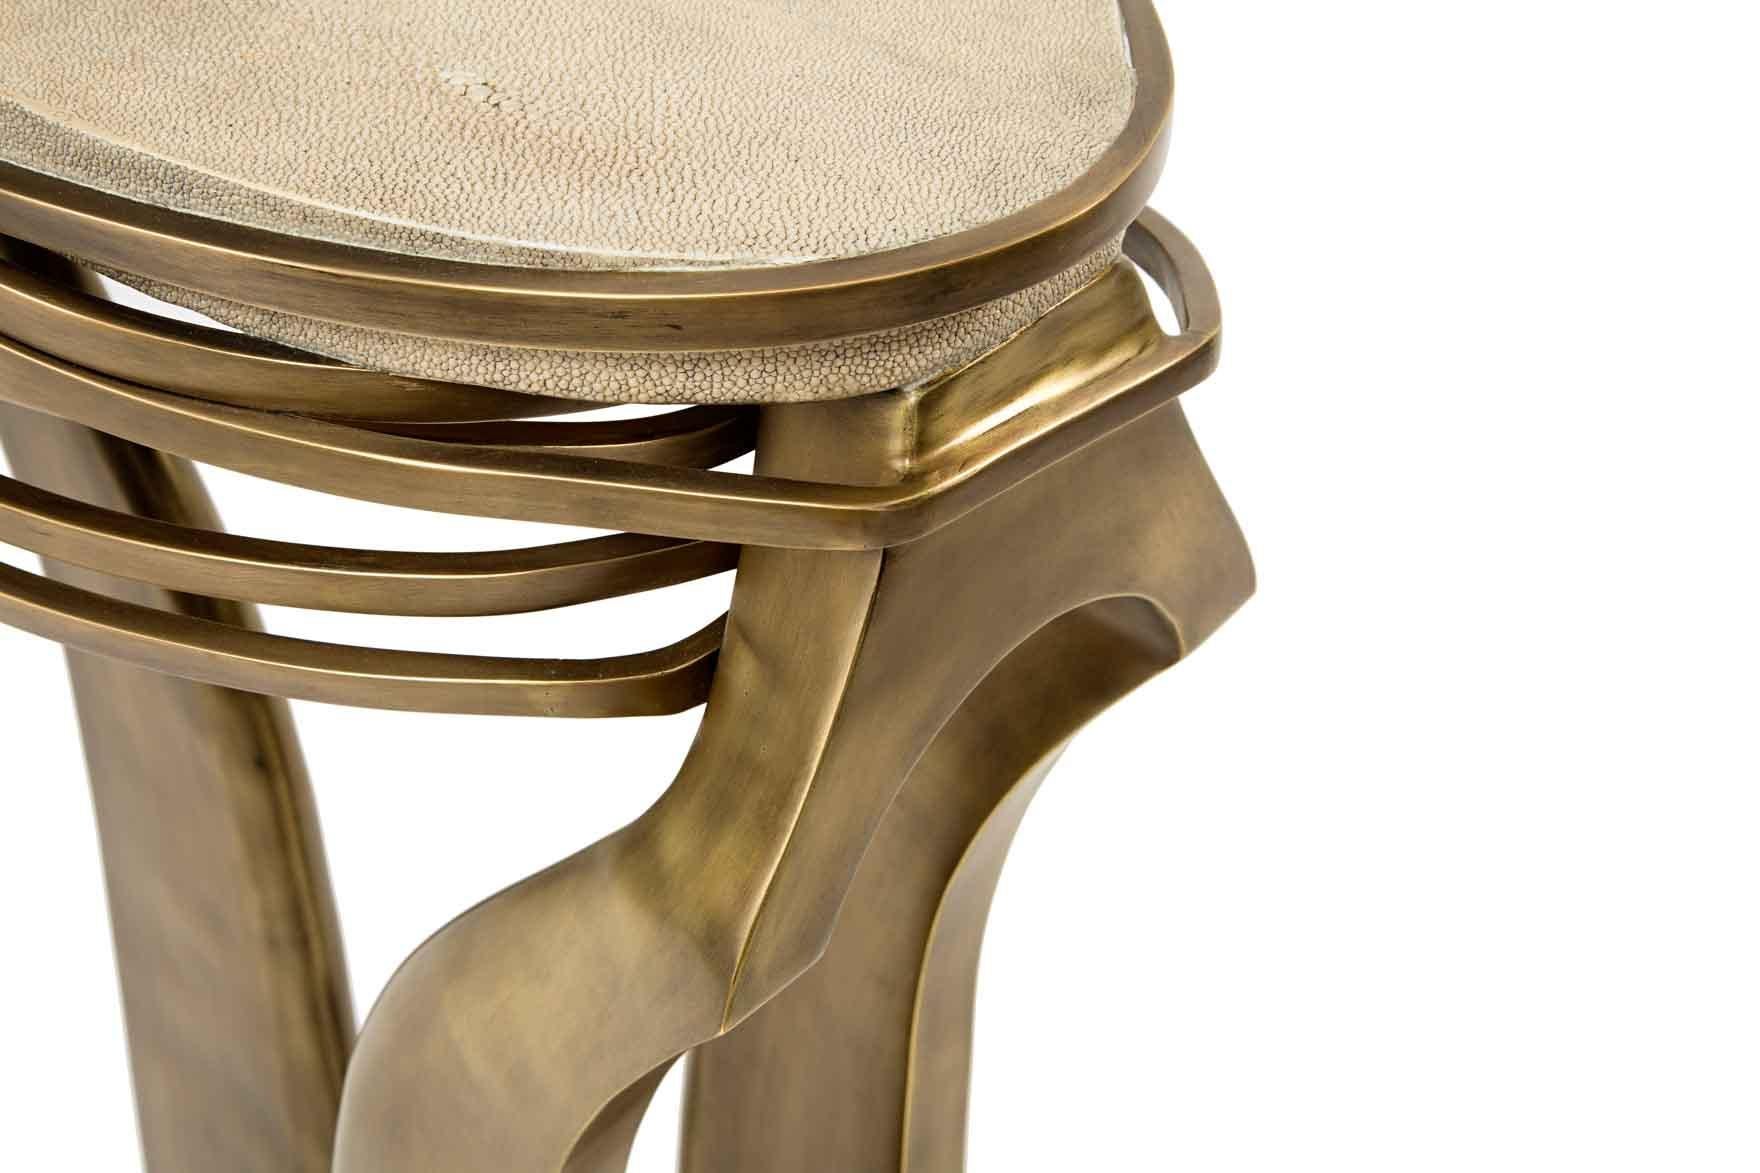 The galaxy side table in small is an iconic Kifu Paris piece. Whimsical, sculptural and bold this piece makes the ultimate accent piece in any space. The intricate bronze-patina brass rings encircle the cream shagreen amorphous-shaped inlaid top.